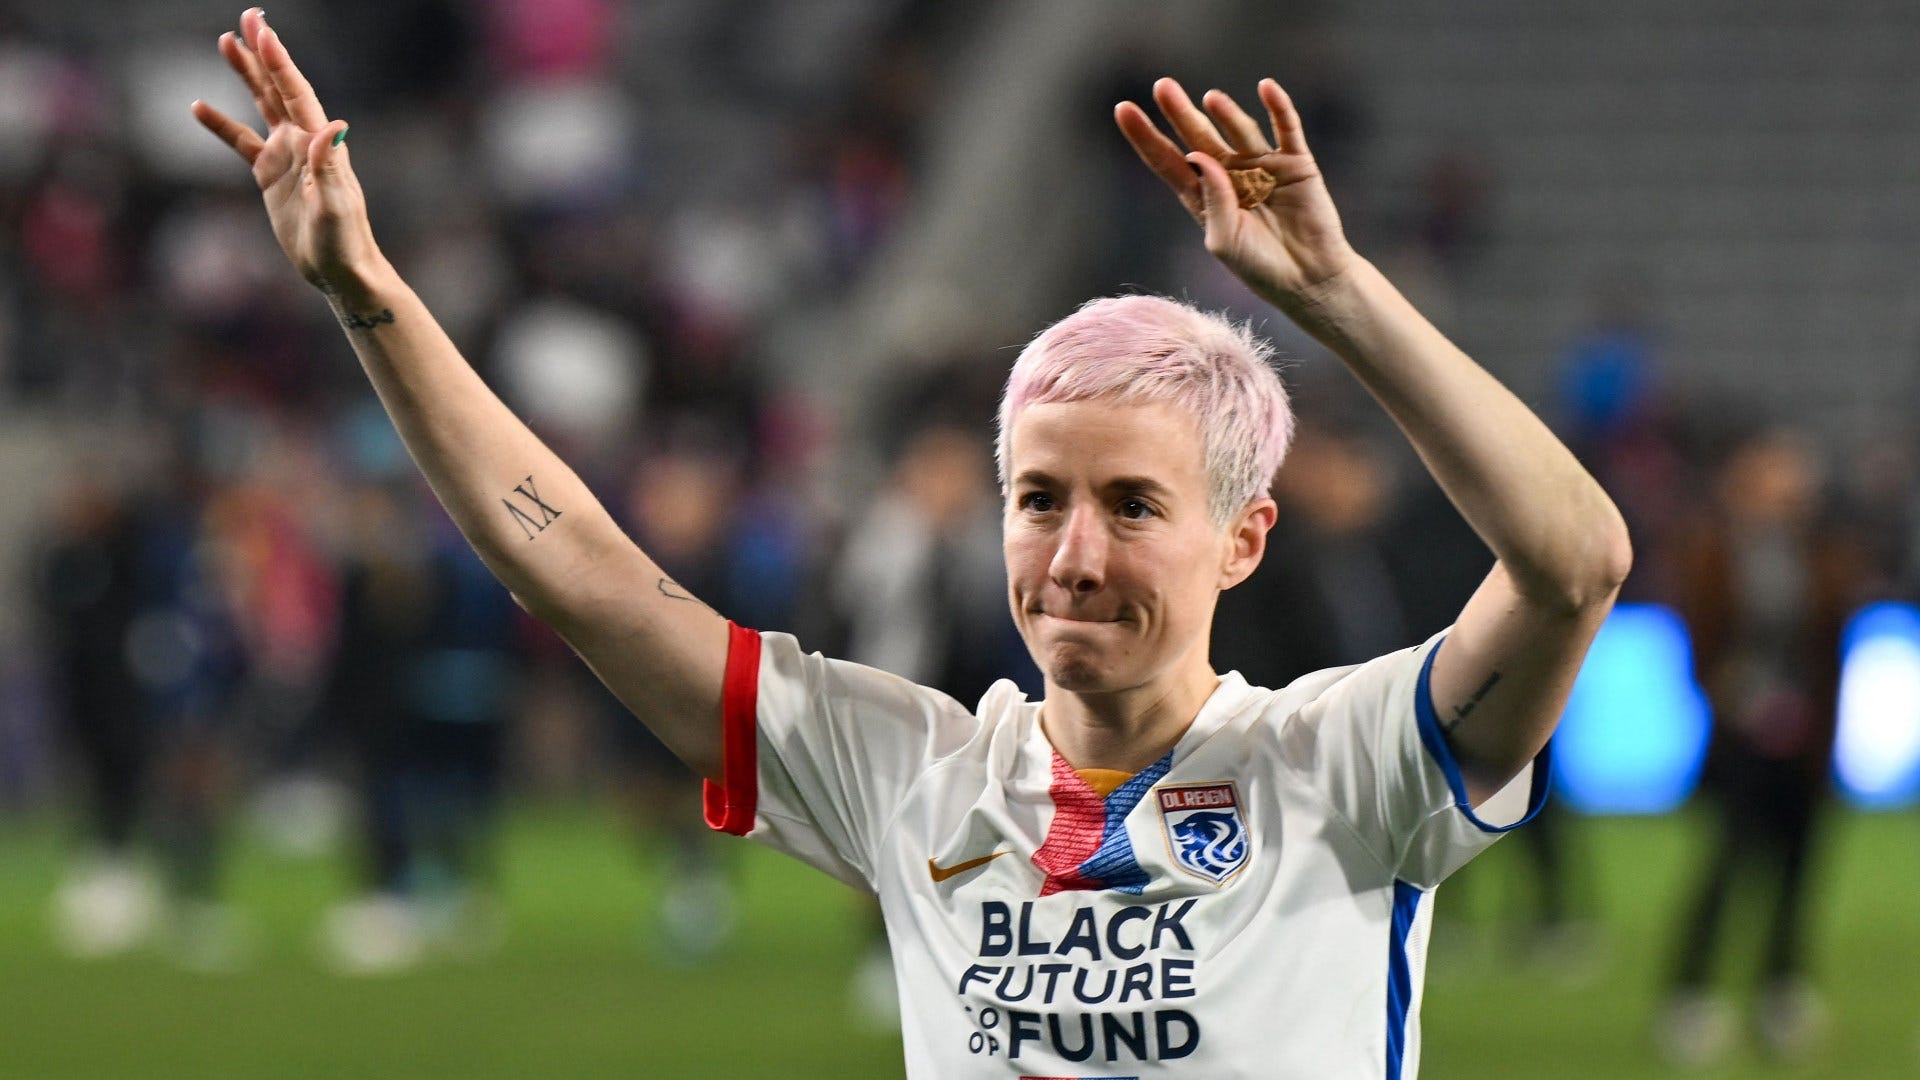 This is the world watching': OL Reign players embrace the moment ahead of  NWSL championship | The Seattle Times